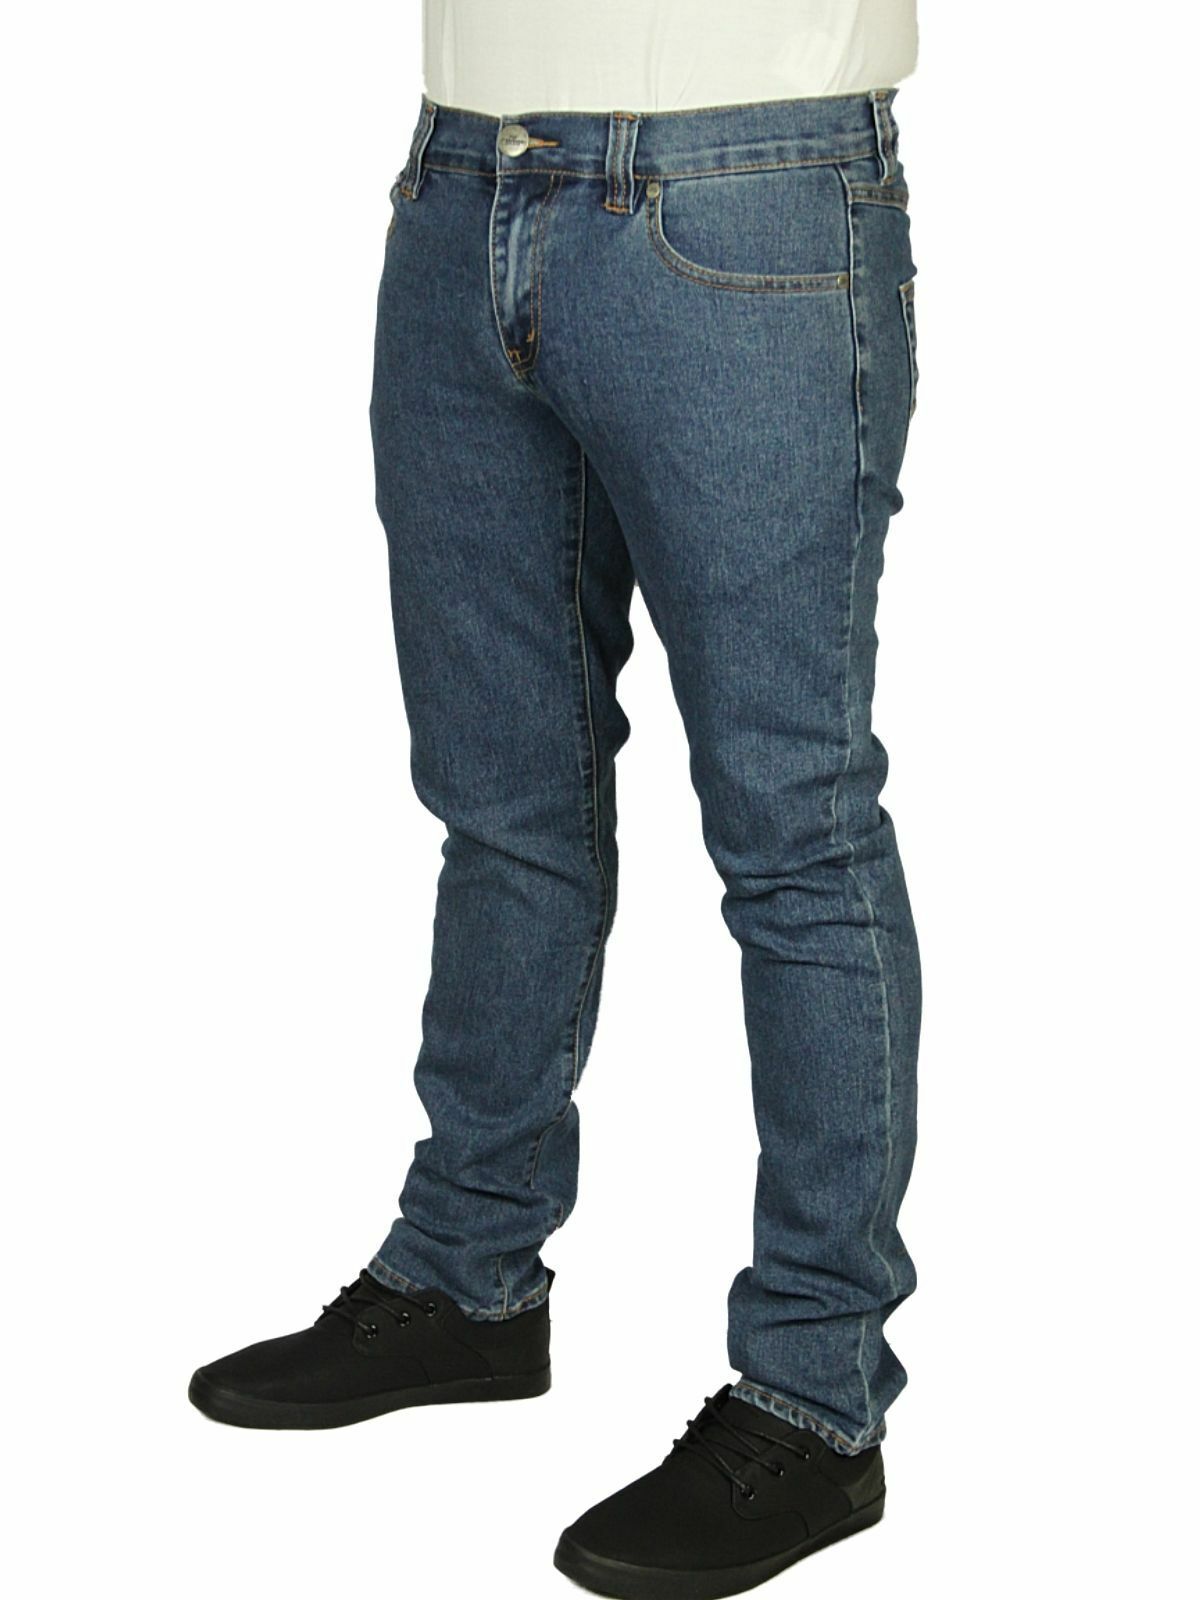 Mens Comofrtable Casual Wear Denim Stretchable Jeans, 28-40 Inch